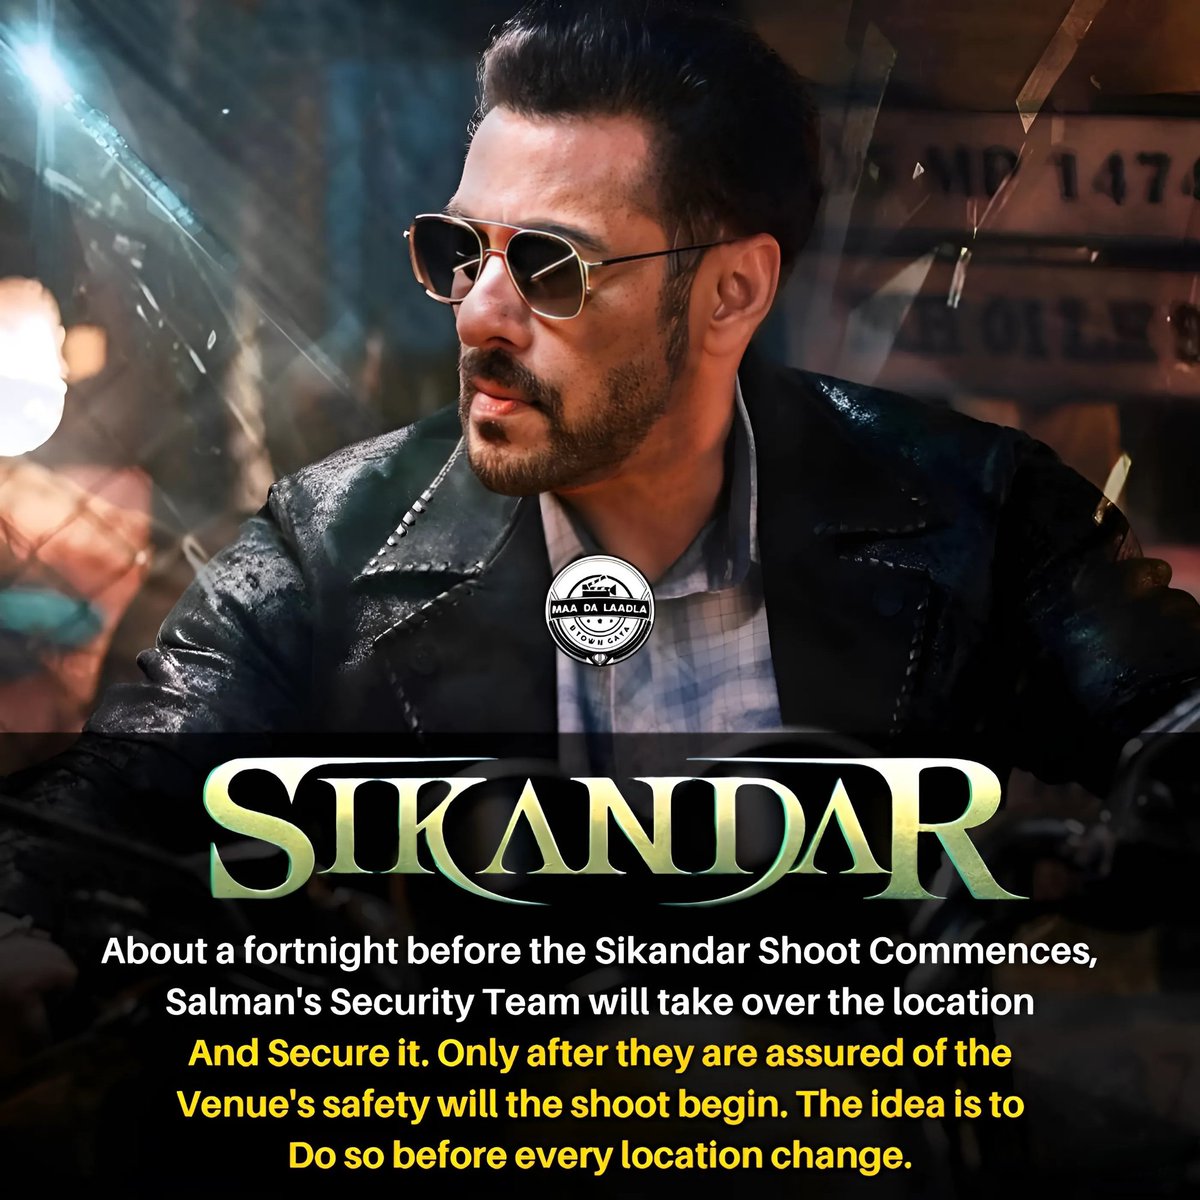 About a fortnight before the #Sikandar Shoot Commences, Salman's Security Team will take over the location And Secure it. Only after they are assured of the Venue's safety will the shoot begin. The idea is to do so before every location changes. 🔥🔥🔥 #SalmanKhan…